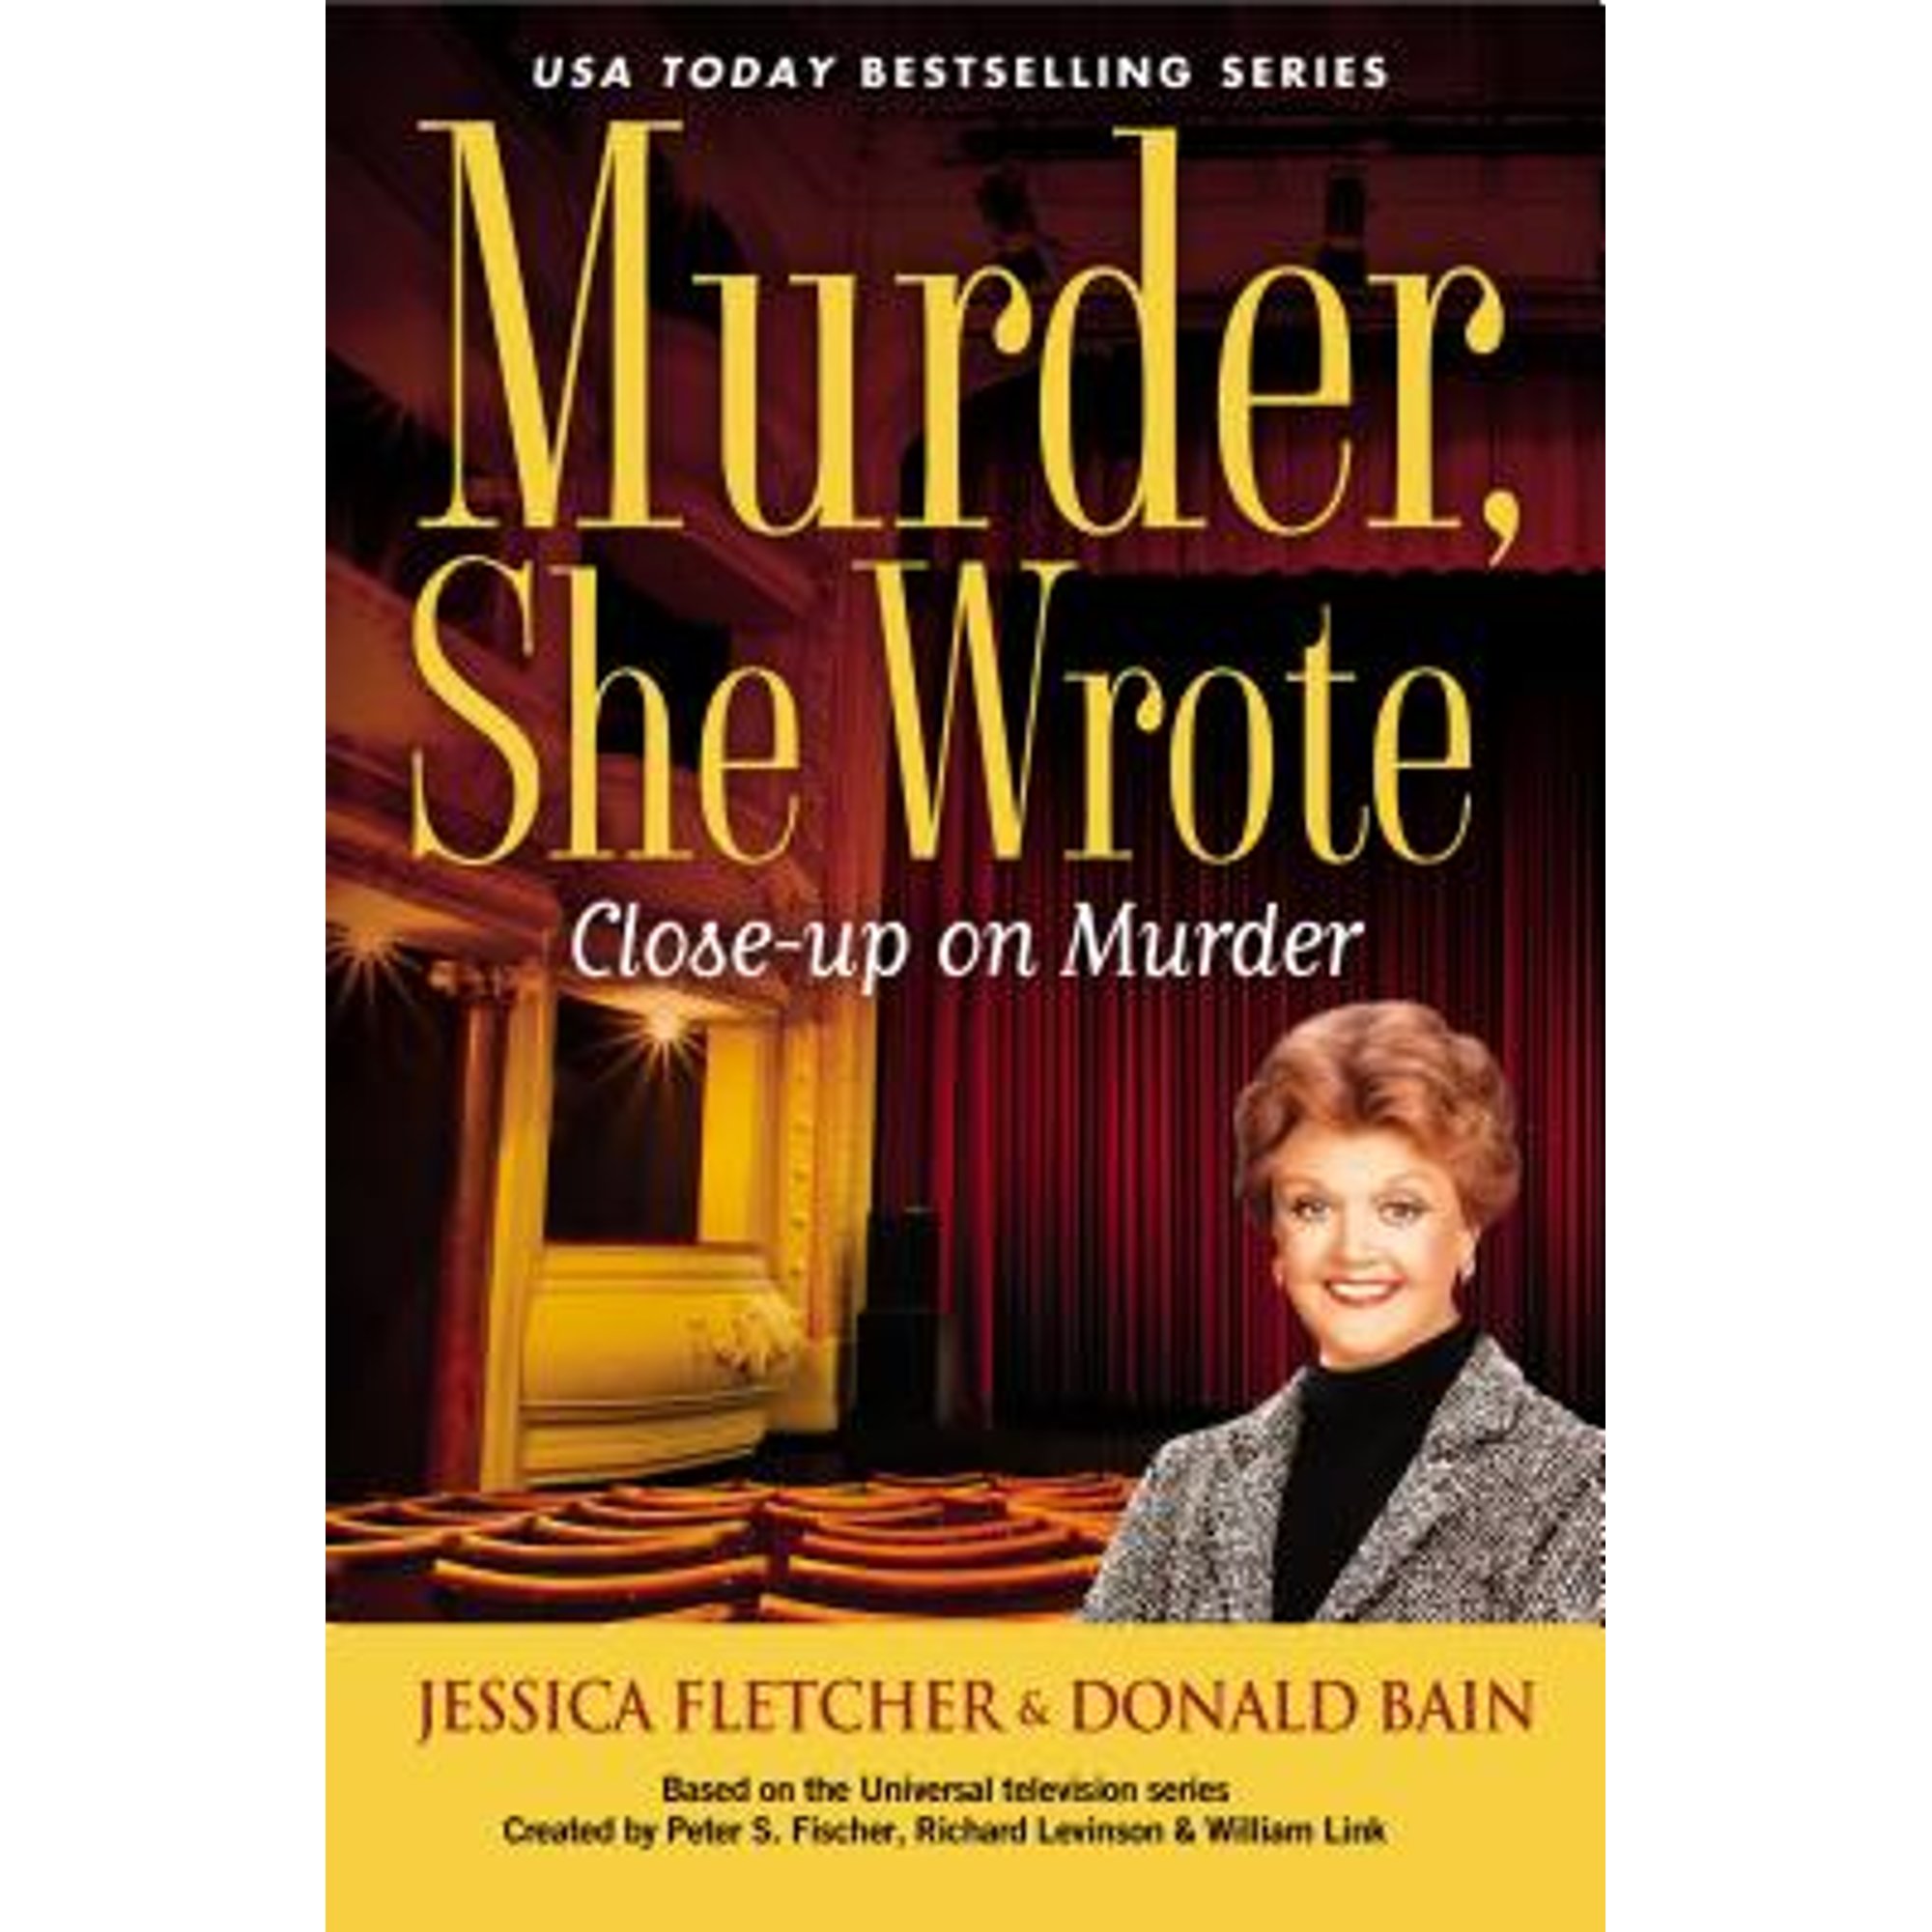 Pre-Owned Close-Up on Murder (Hardcover) by Jessica Fletcher, Donald Bain - image 1 of 1